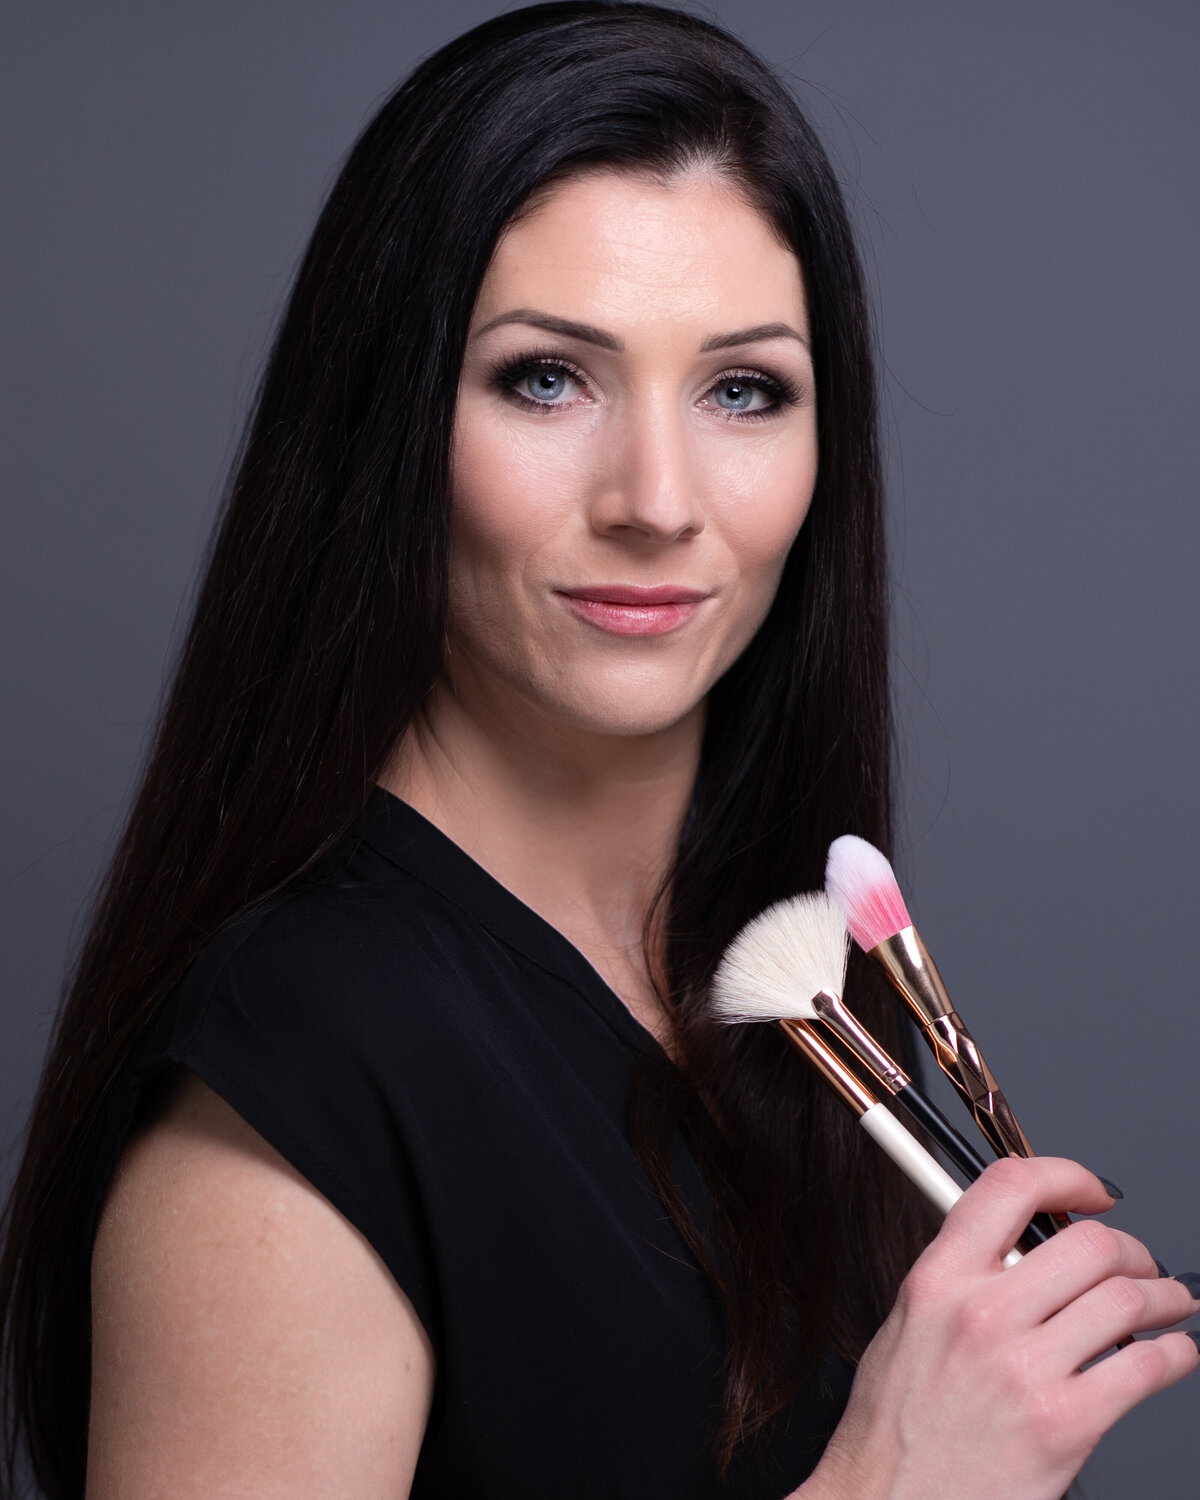 Ottawa branding photos of a makeup artist holding her brushes.   Captured by JEMMAN Photography Commercial